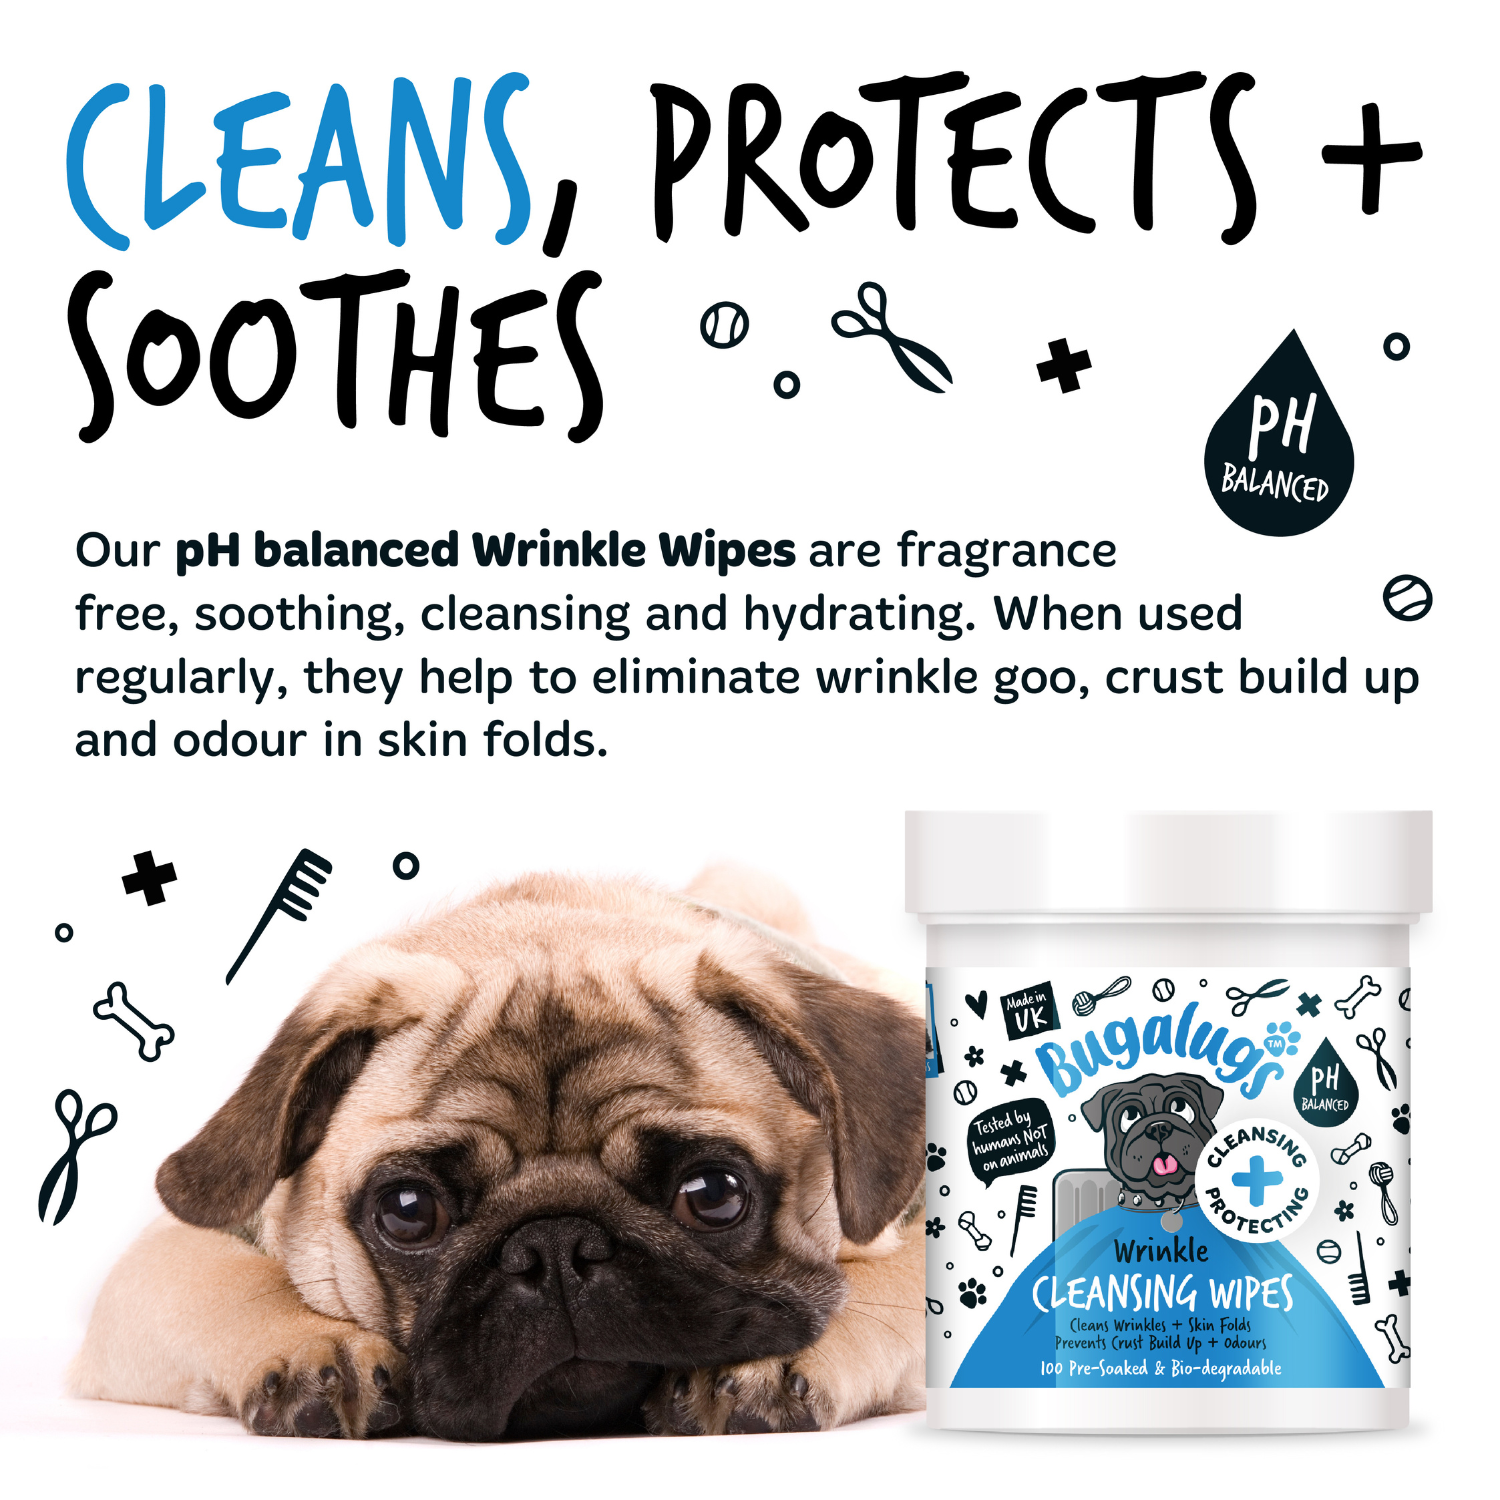 Bugalugs Wrinkle Cleansing Wipes - Cleans, protects and soothes